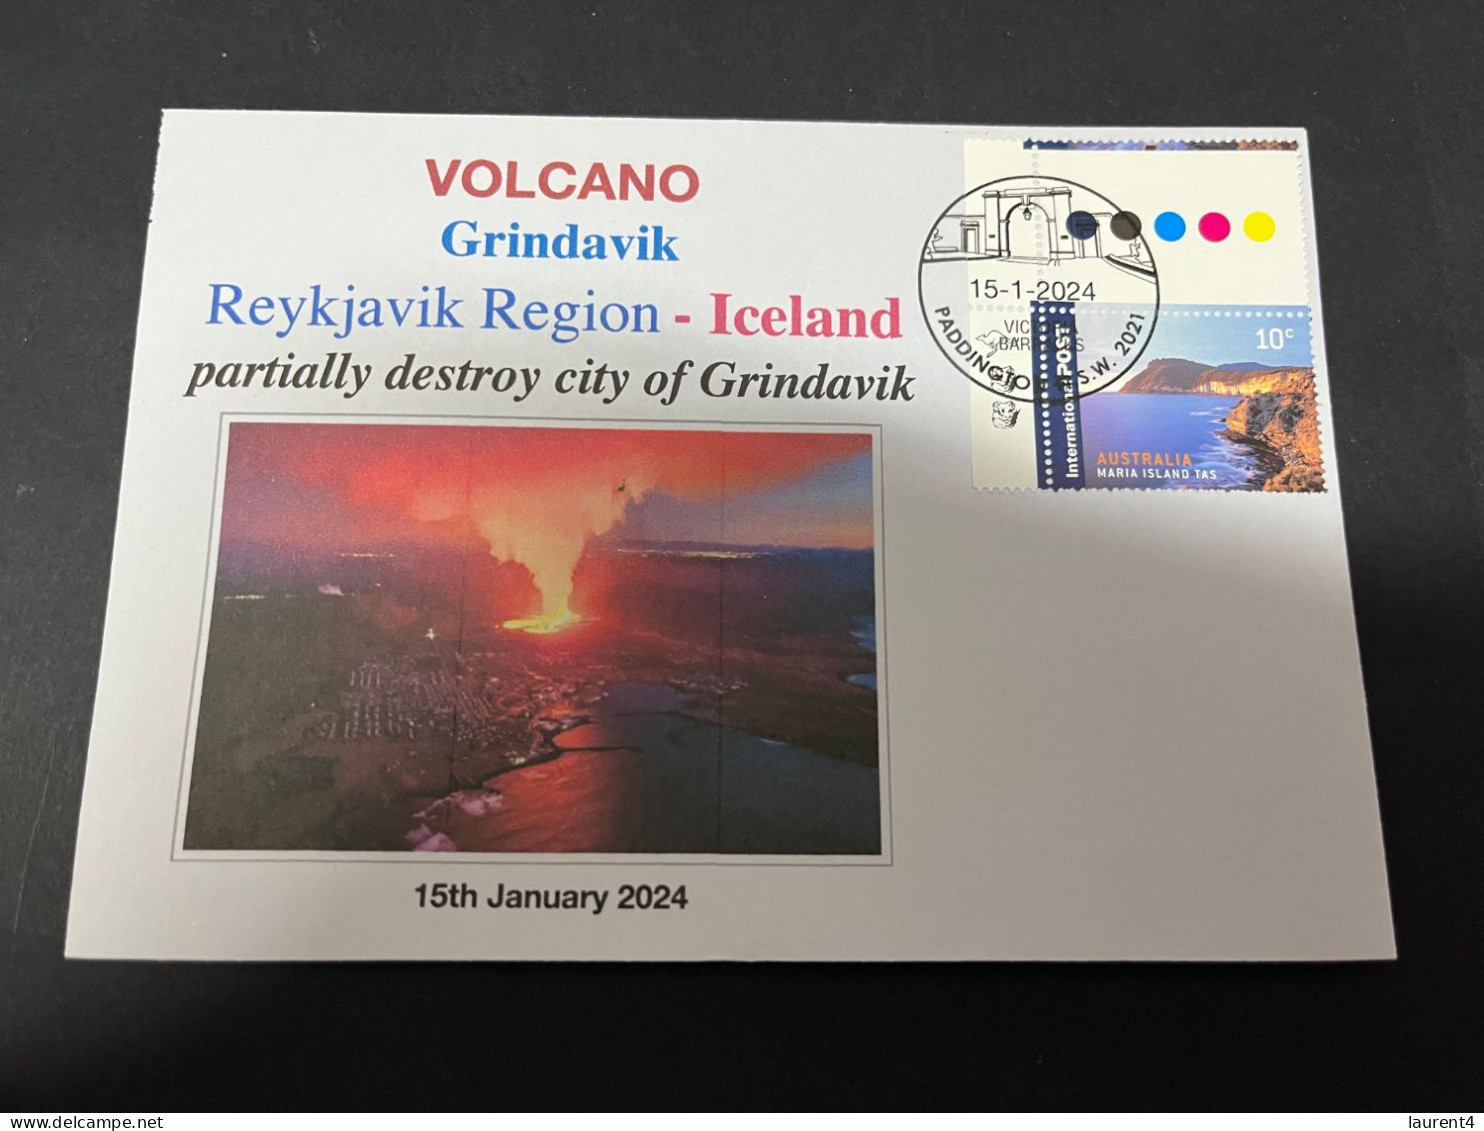 19-1-2024 (1 X 32) Iceland - Volcano Erution Partially Destroyed Fishing City Of Grindavik - Volcans